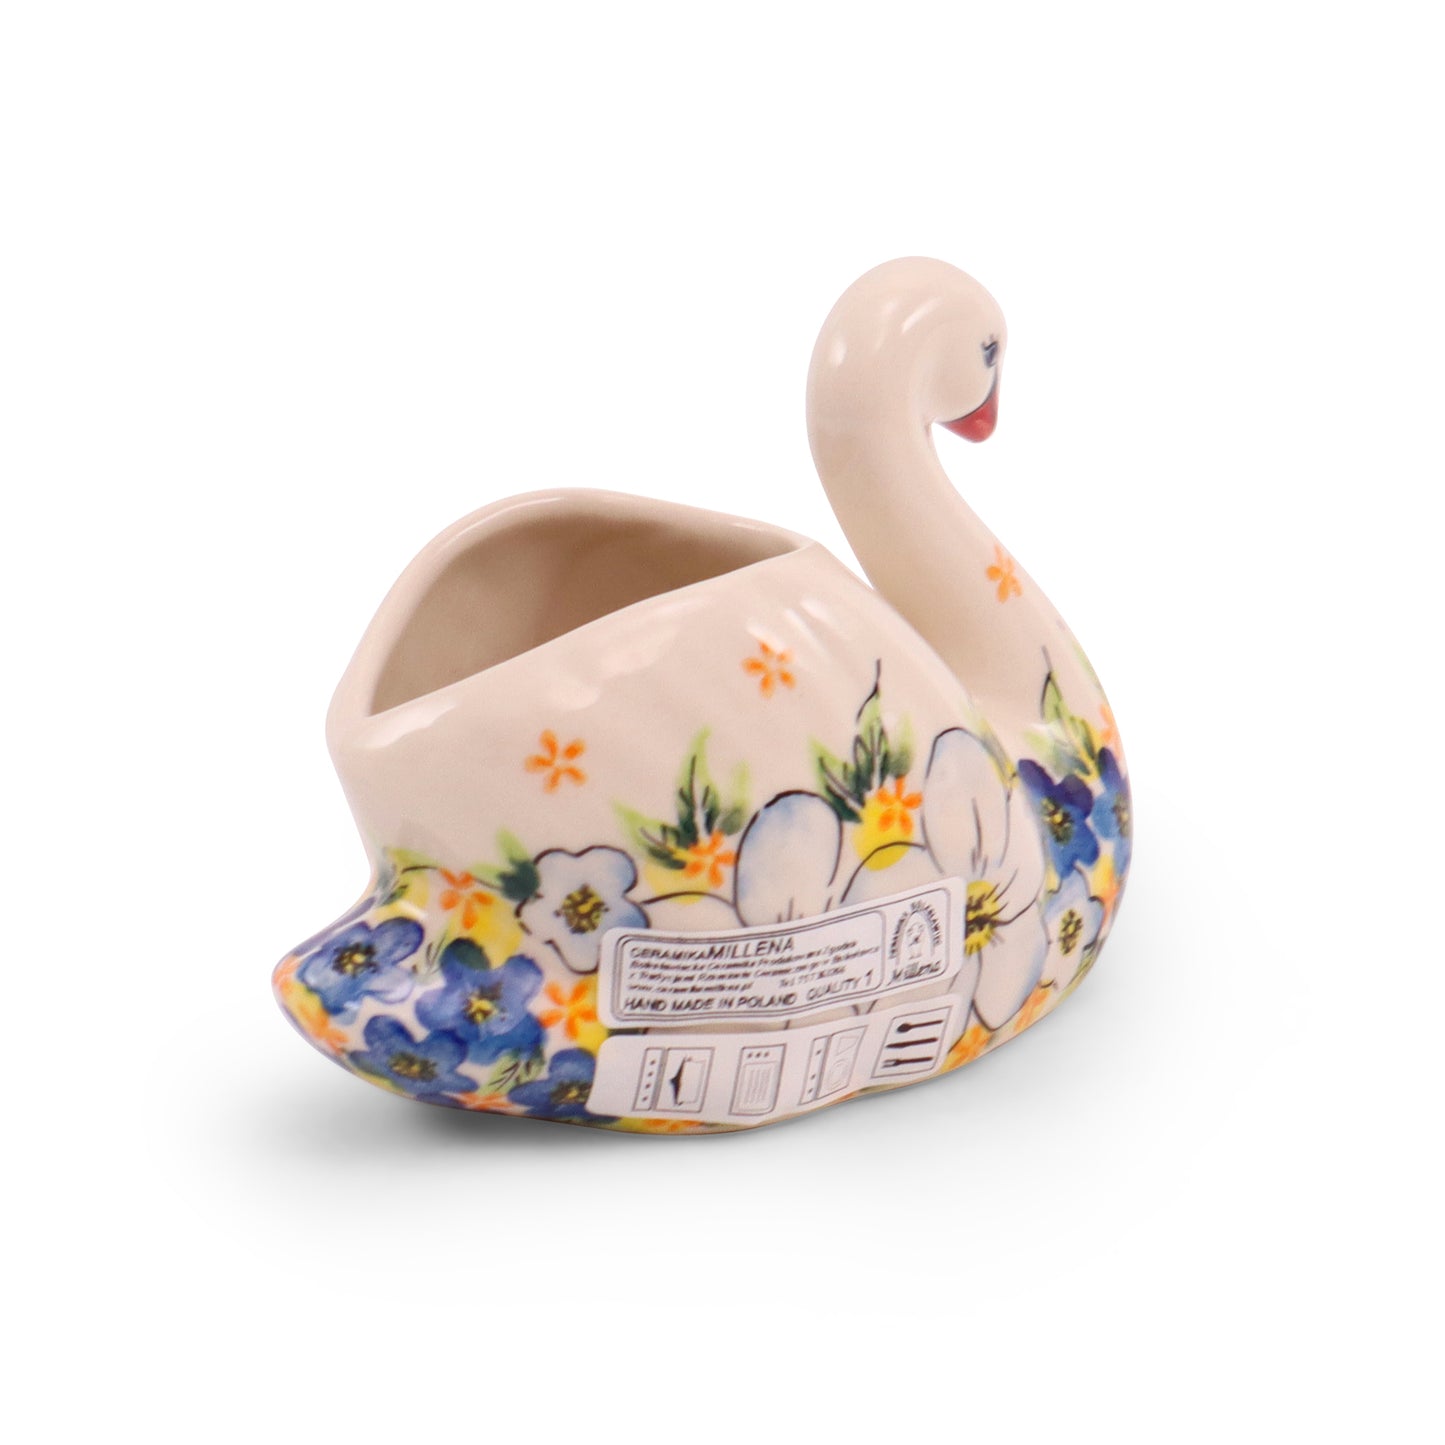 5"x3.5" Swan Container. Pattern: U88